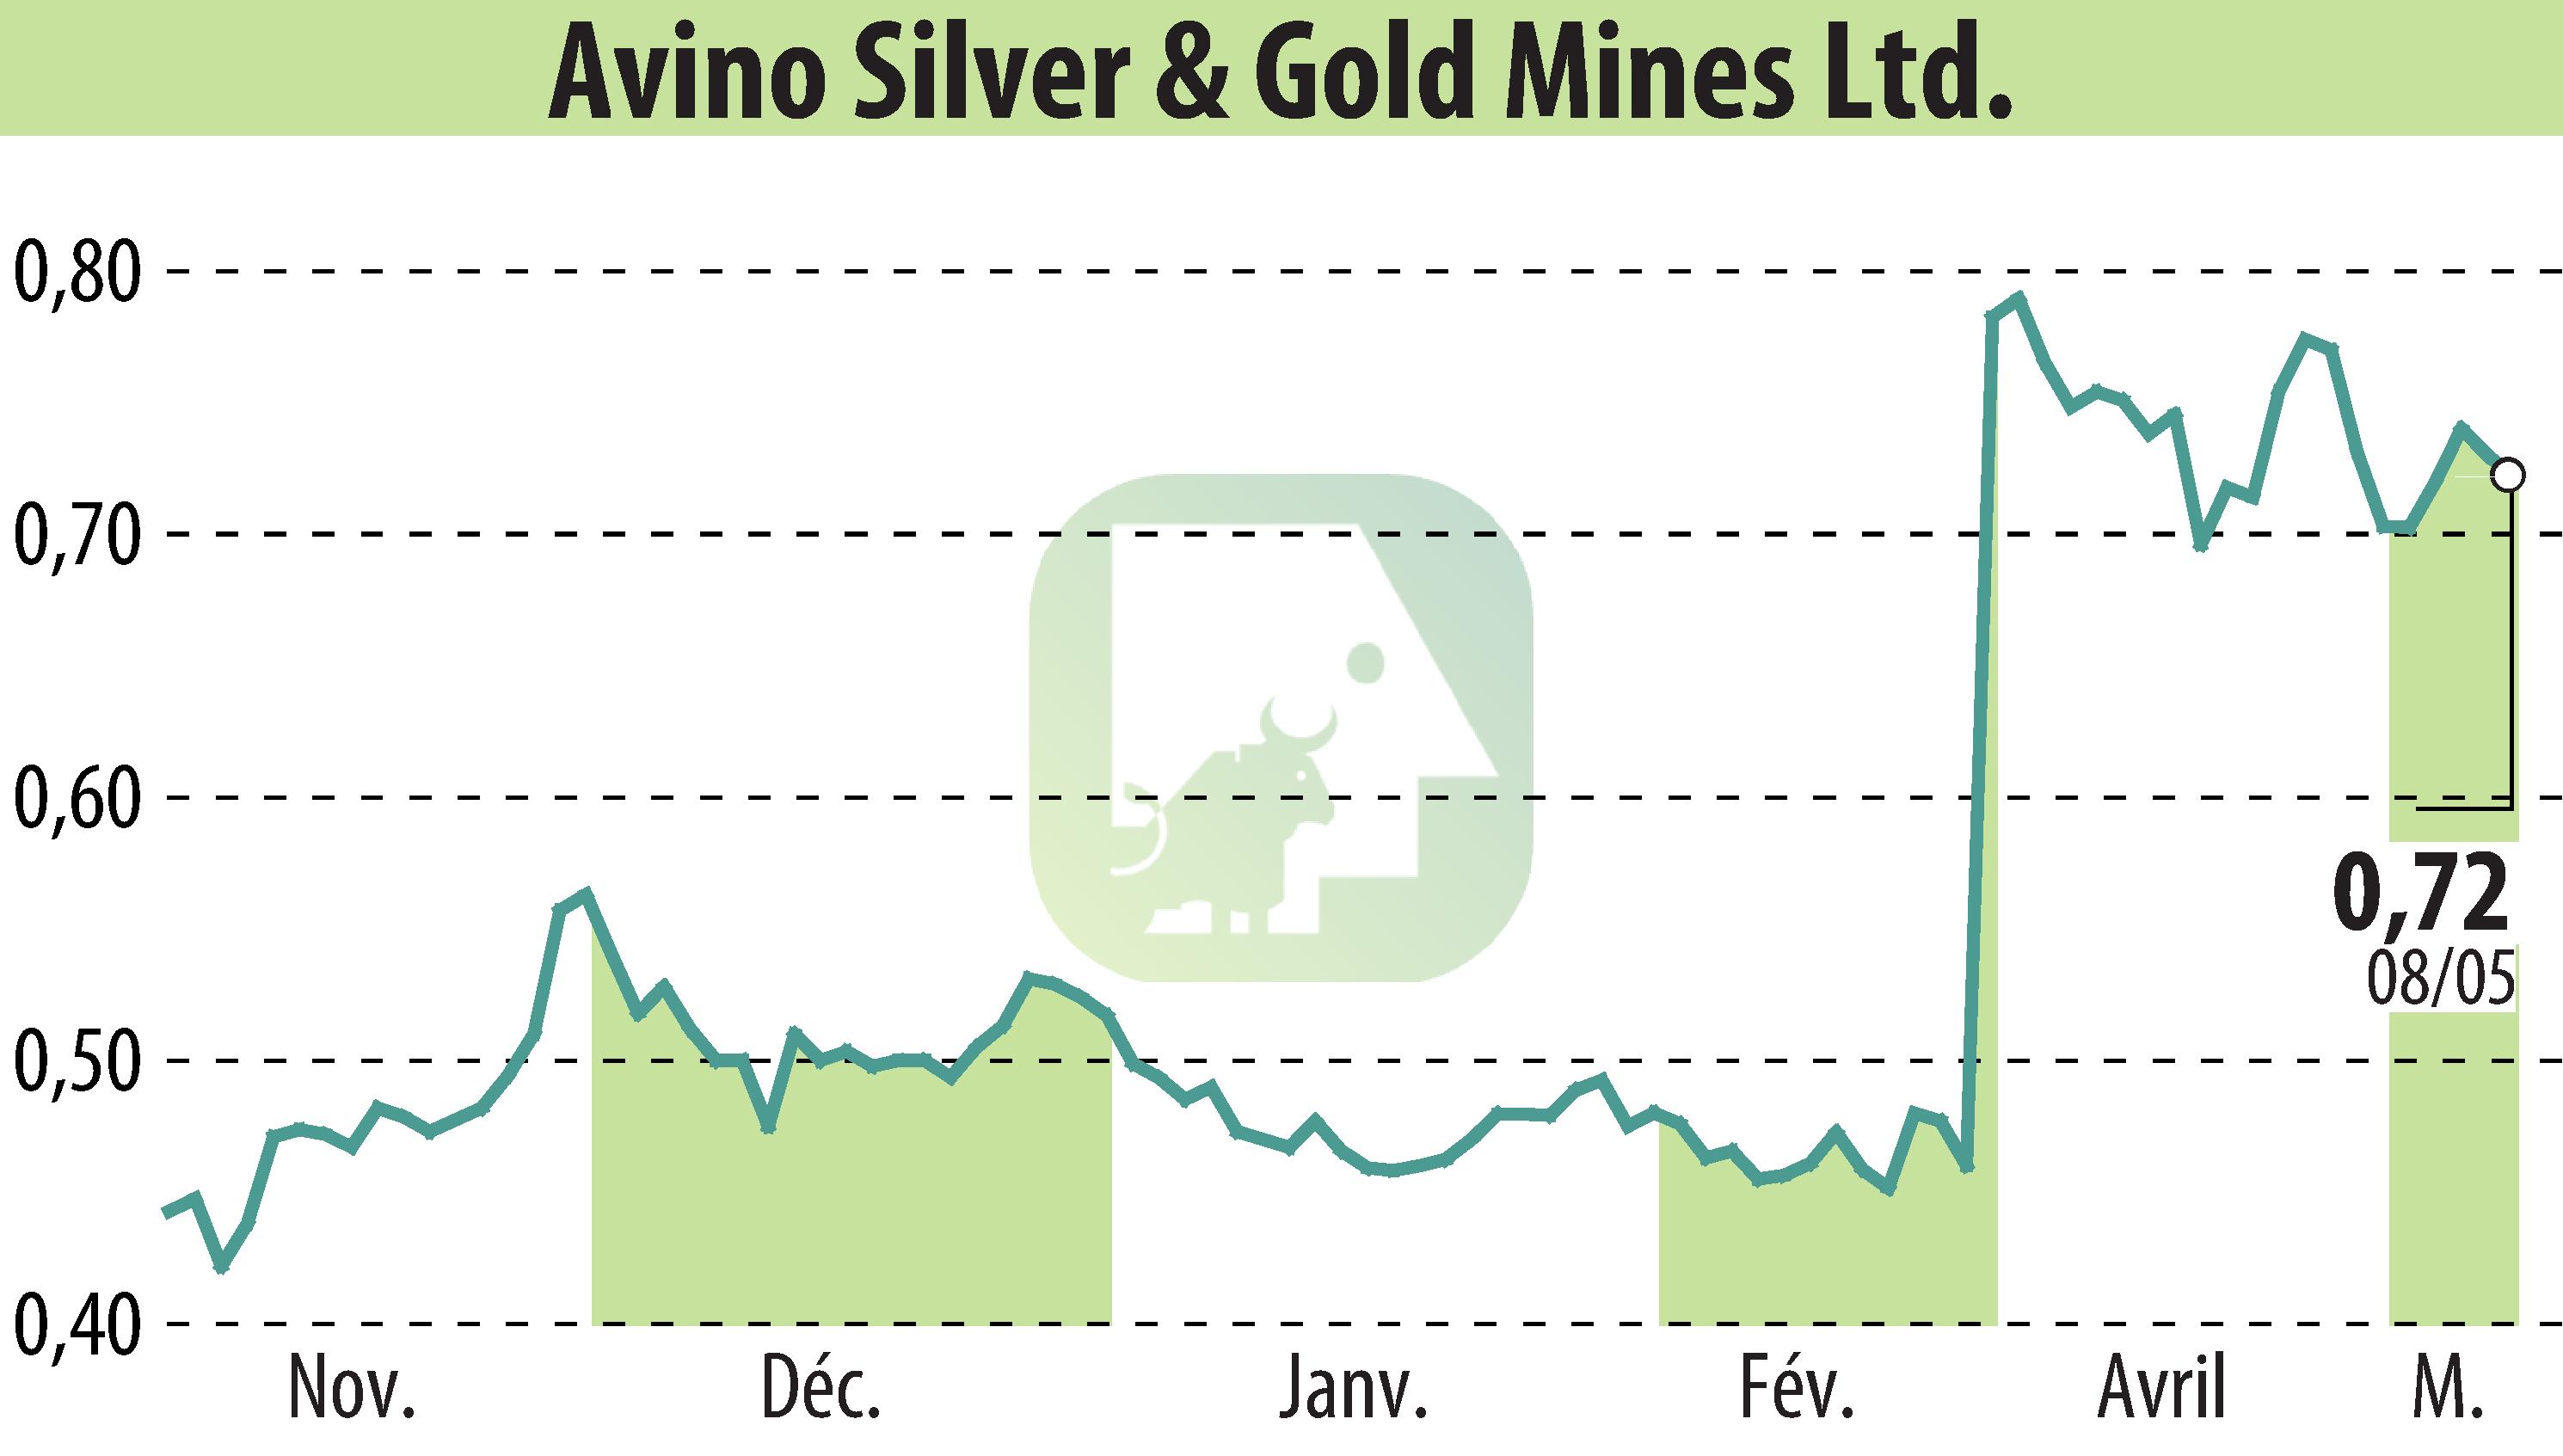 Stock price chart of Avino Silver & Gold Mines Ltd. (EBR:ASM) showing fluctuations.